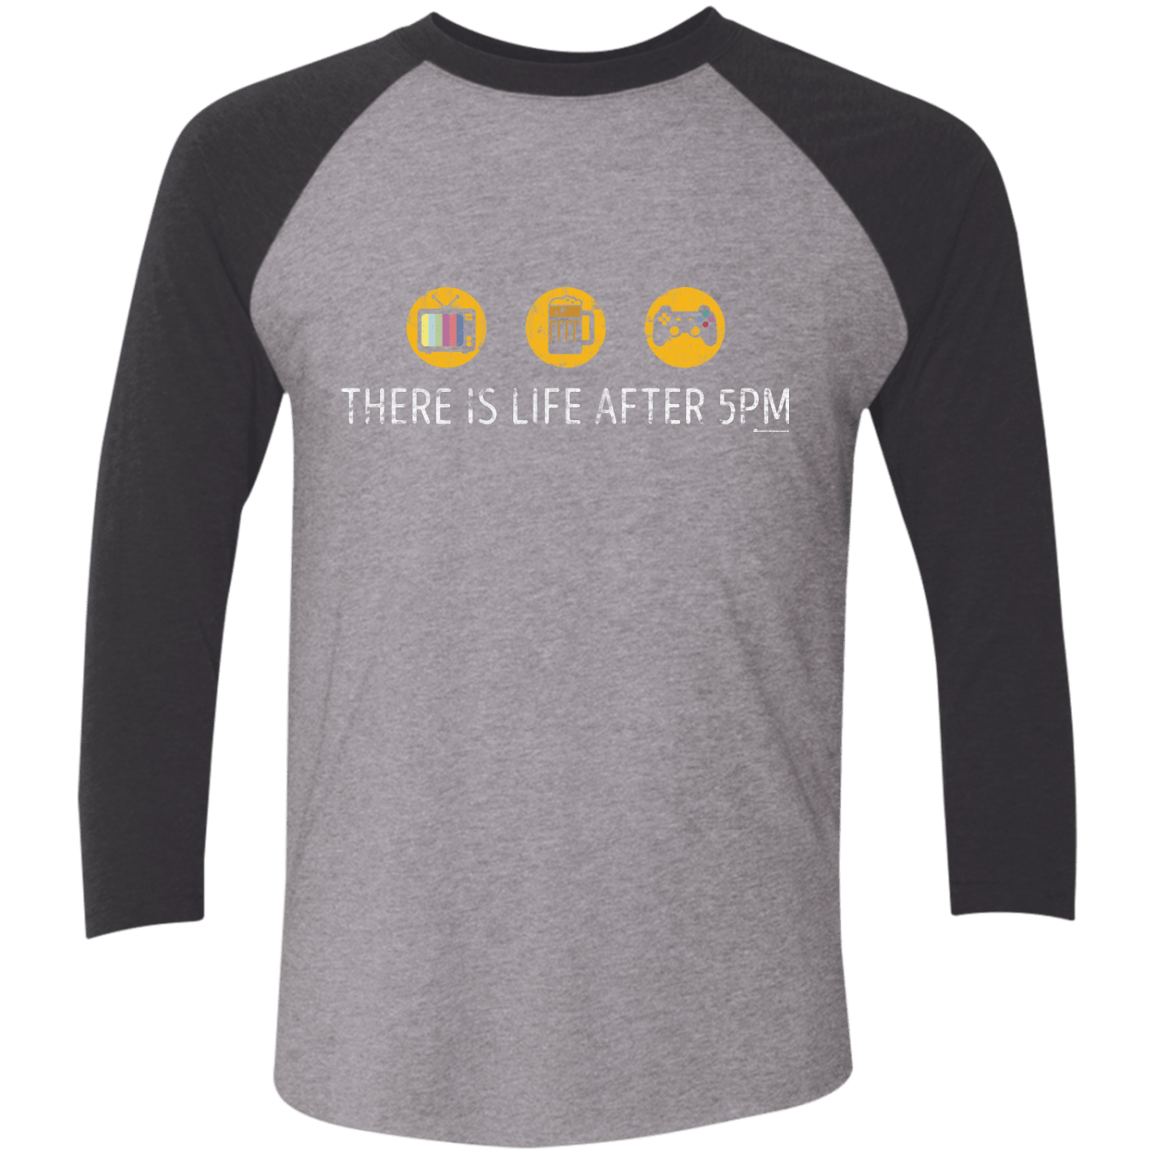 T-Shirts Premium Heather/Vintage Black / X-Small There Is Life After 5PM Men's Triblend 3/4 Sleeve